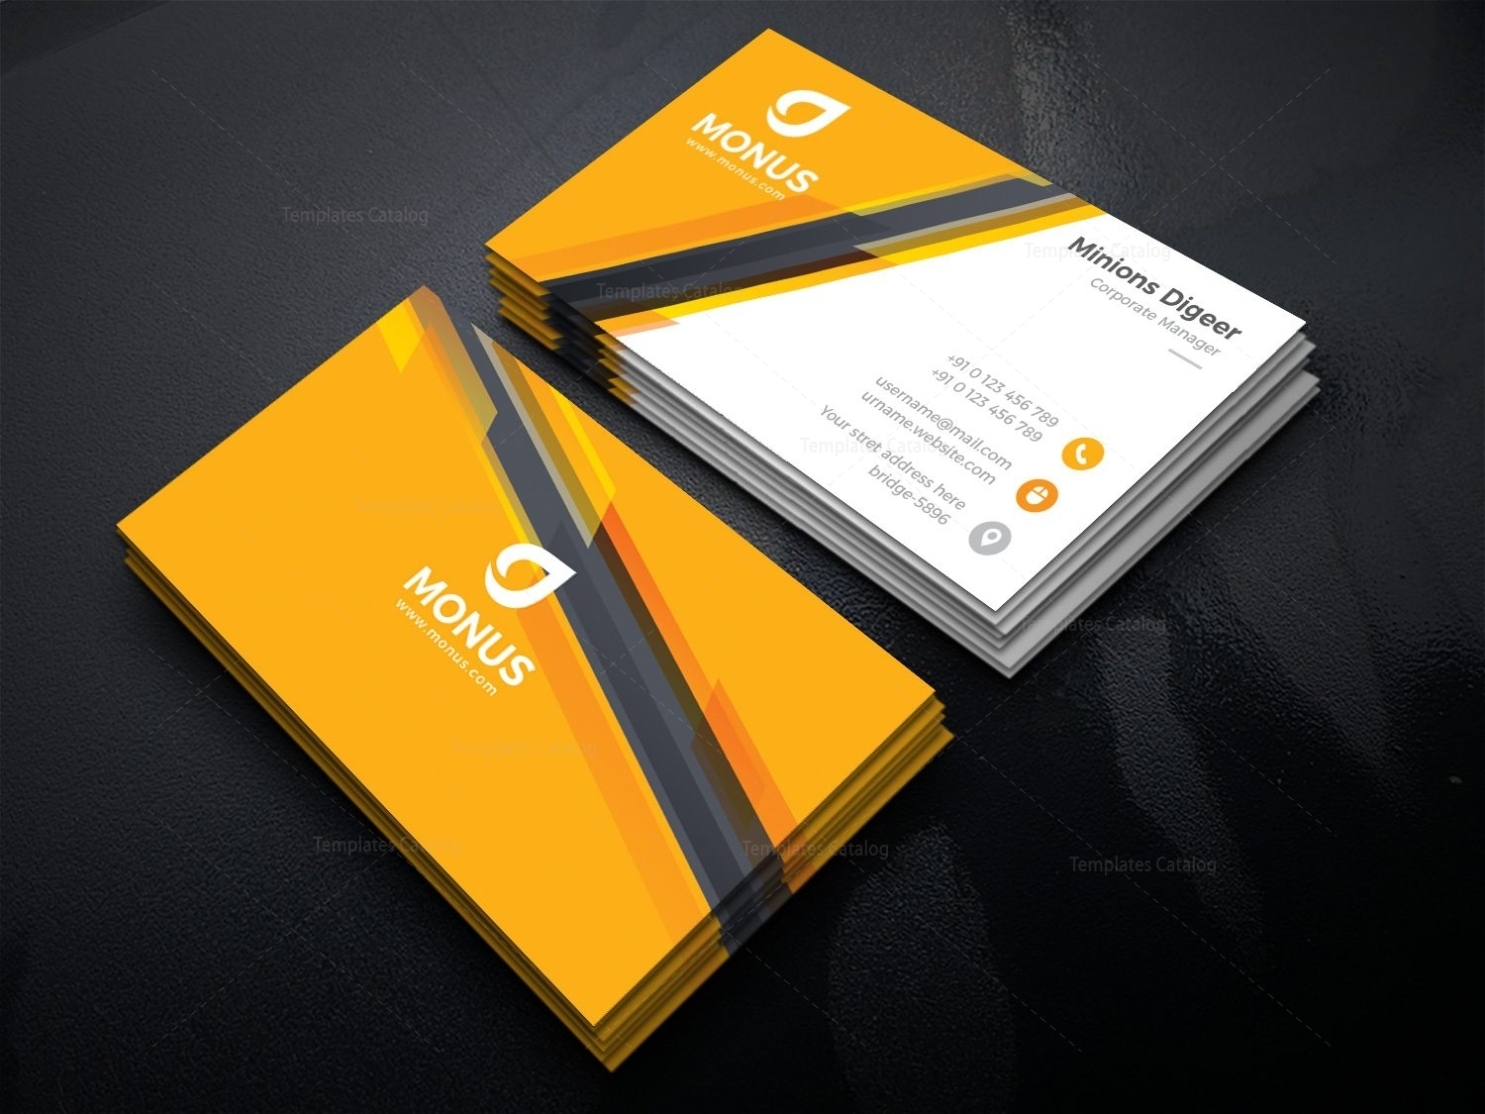 Awesome Corporate Business Card Design Template 001585 – Template Catalog In Buisness Card Template